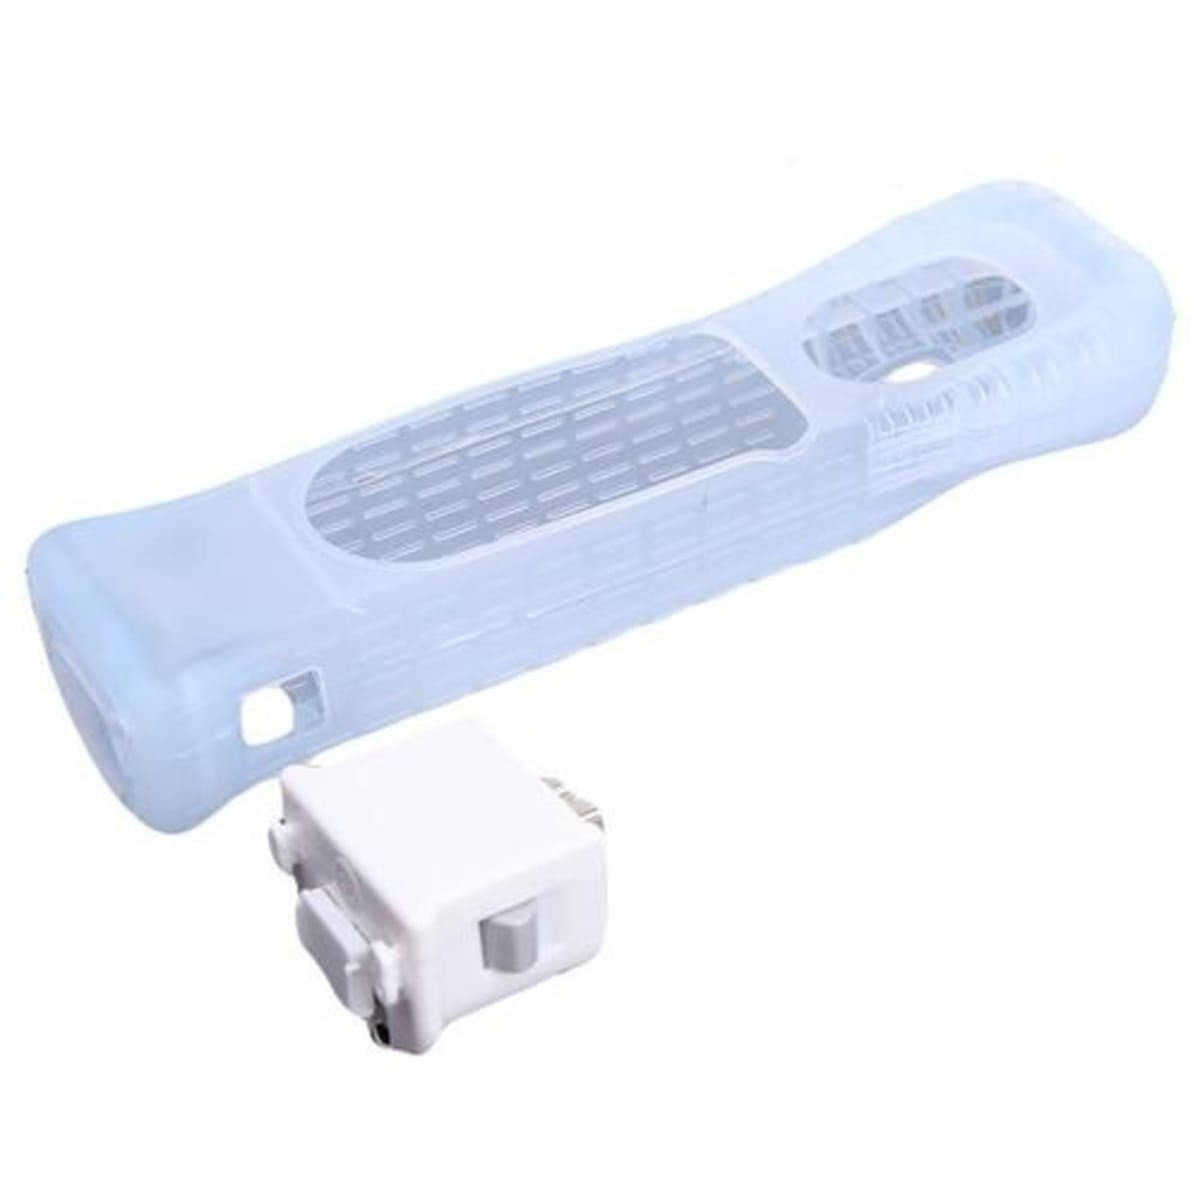 Game Remote Motion Plus Sensor for Nintendo Wii Remote Controller with  Adapter and Silicone Case 